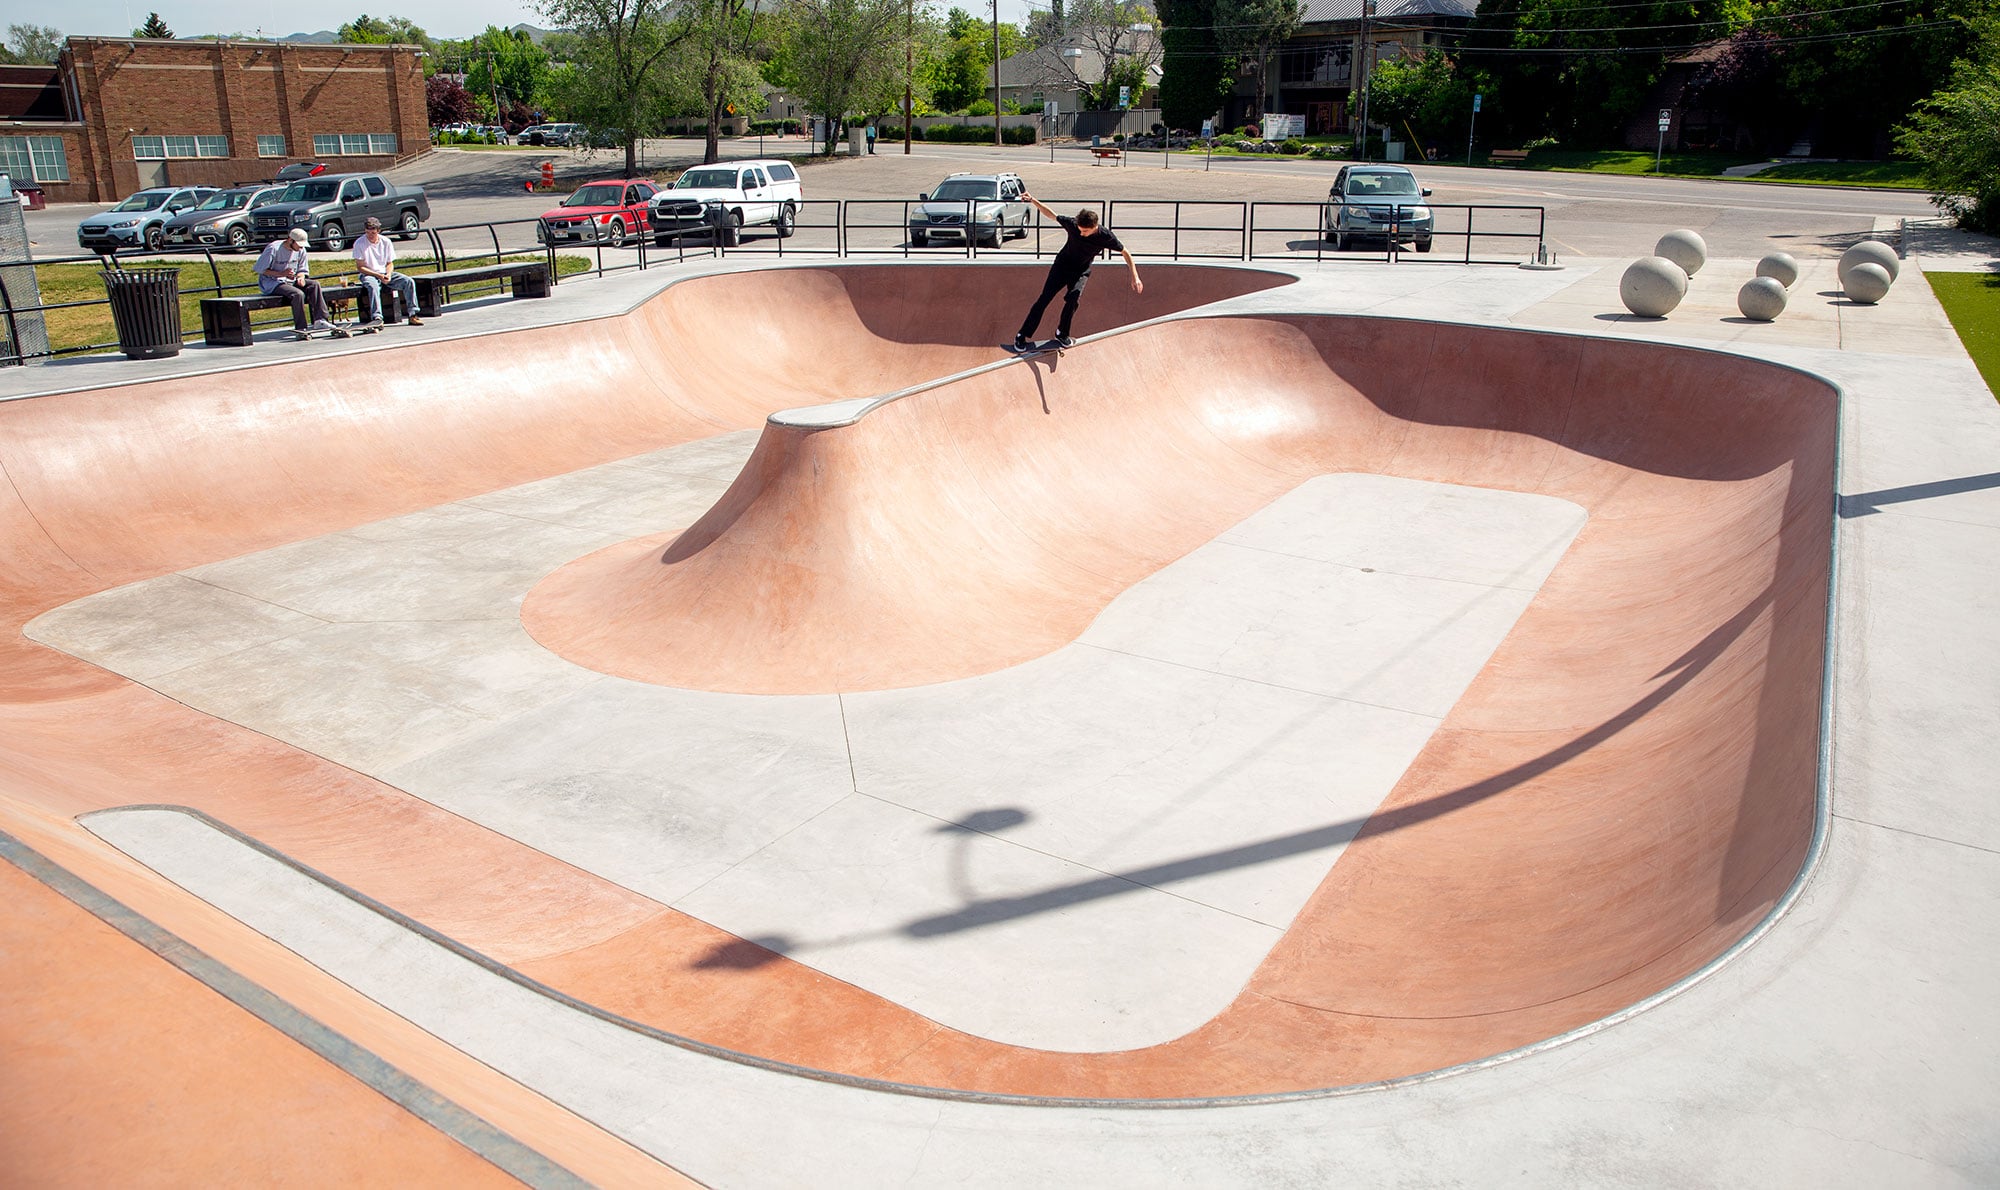 Feeble grind on the spine with Tyson Bowerbank at Holladay Skatepark, UT